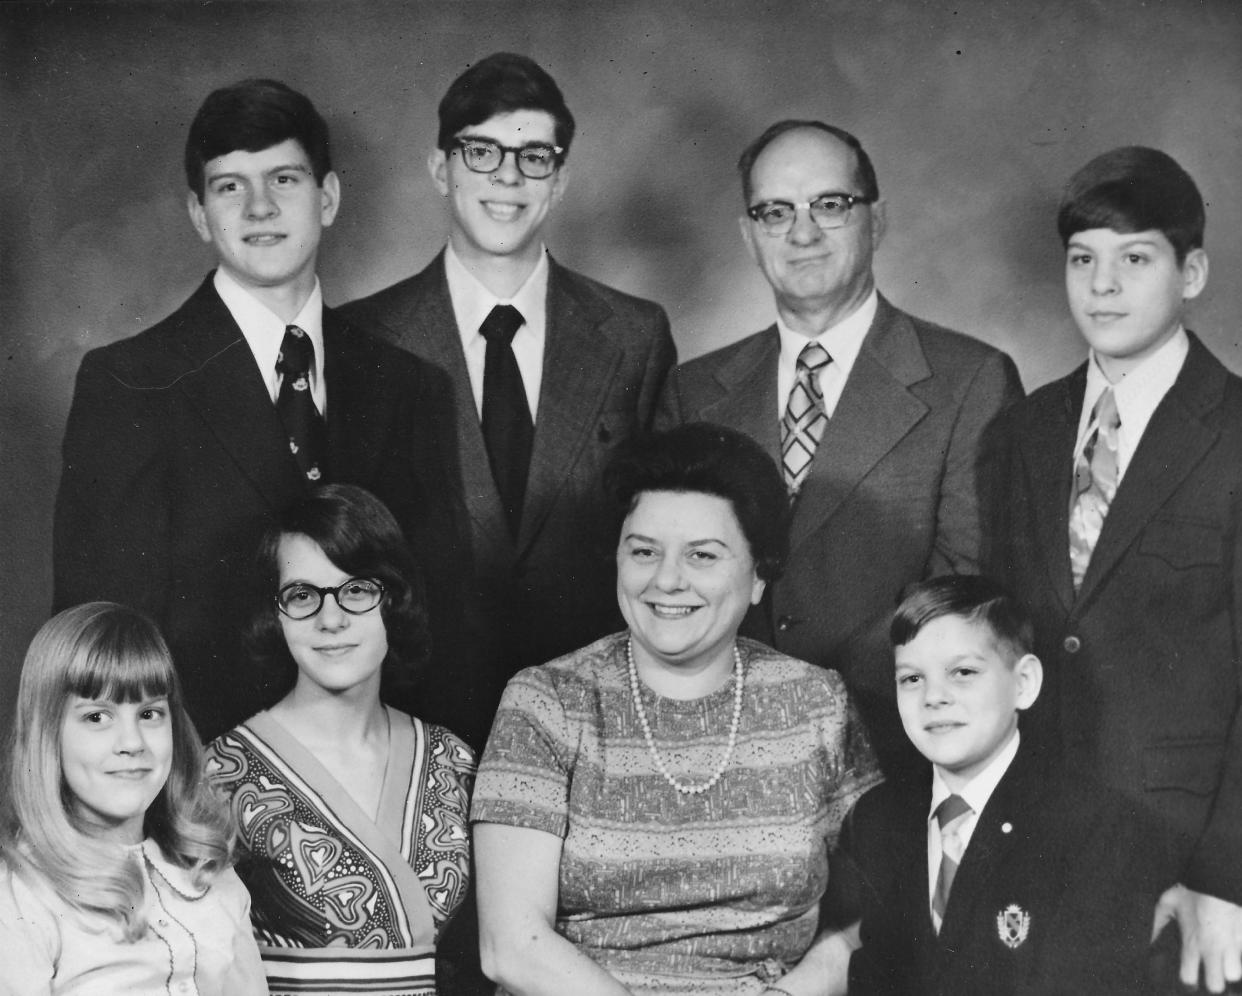 The Anthony family of Wadsworth takes a portrait in 1973. Pictured from bottom left are Julie, 10, Mary Pat, 15, mother Patricia, 39, Daniel, 12, (back row) David, 18, Paul, 19, father Paul, 47, and Peter, 16.